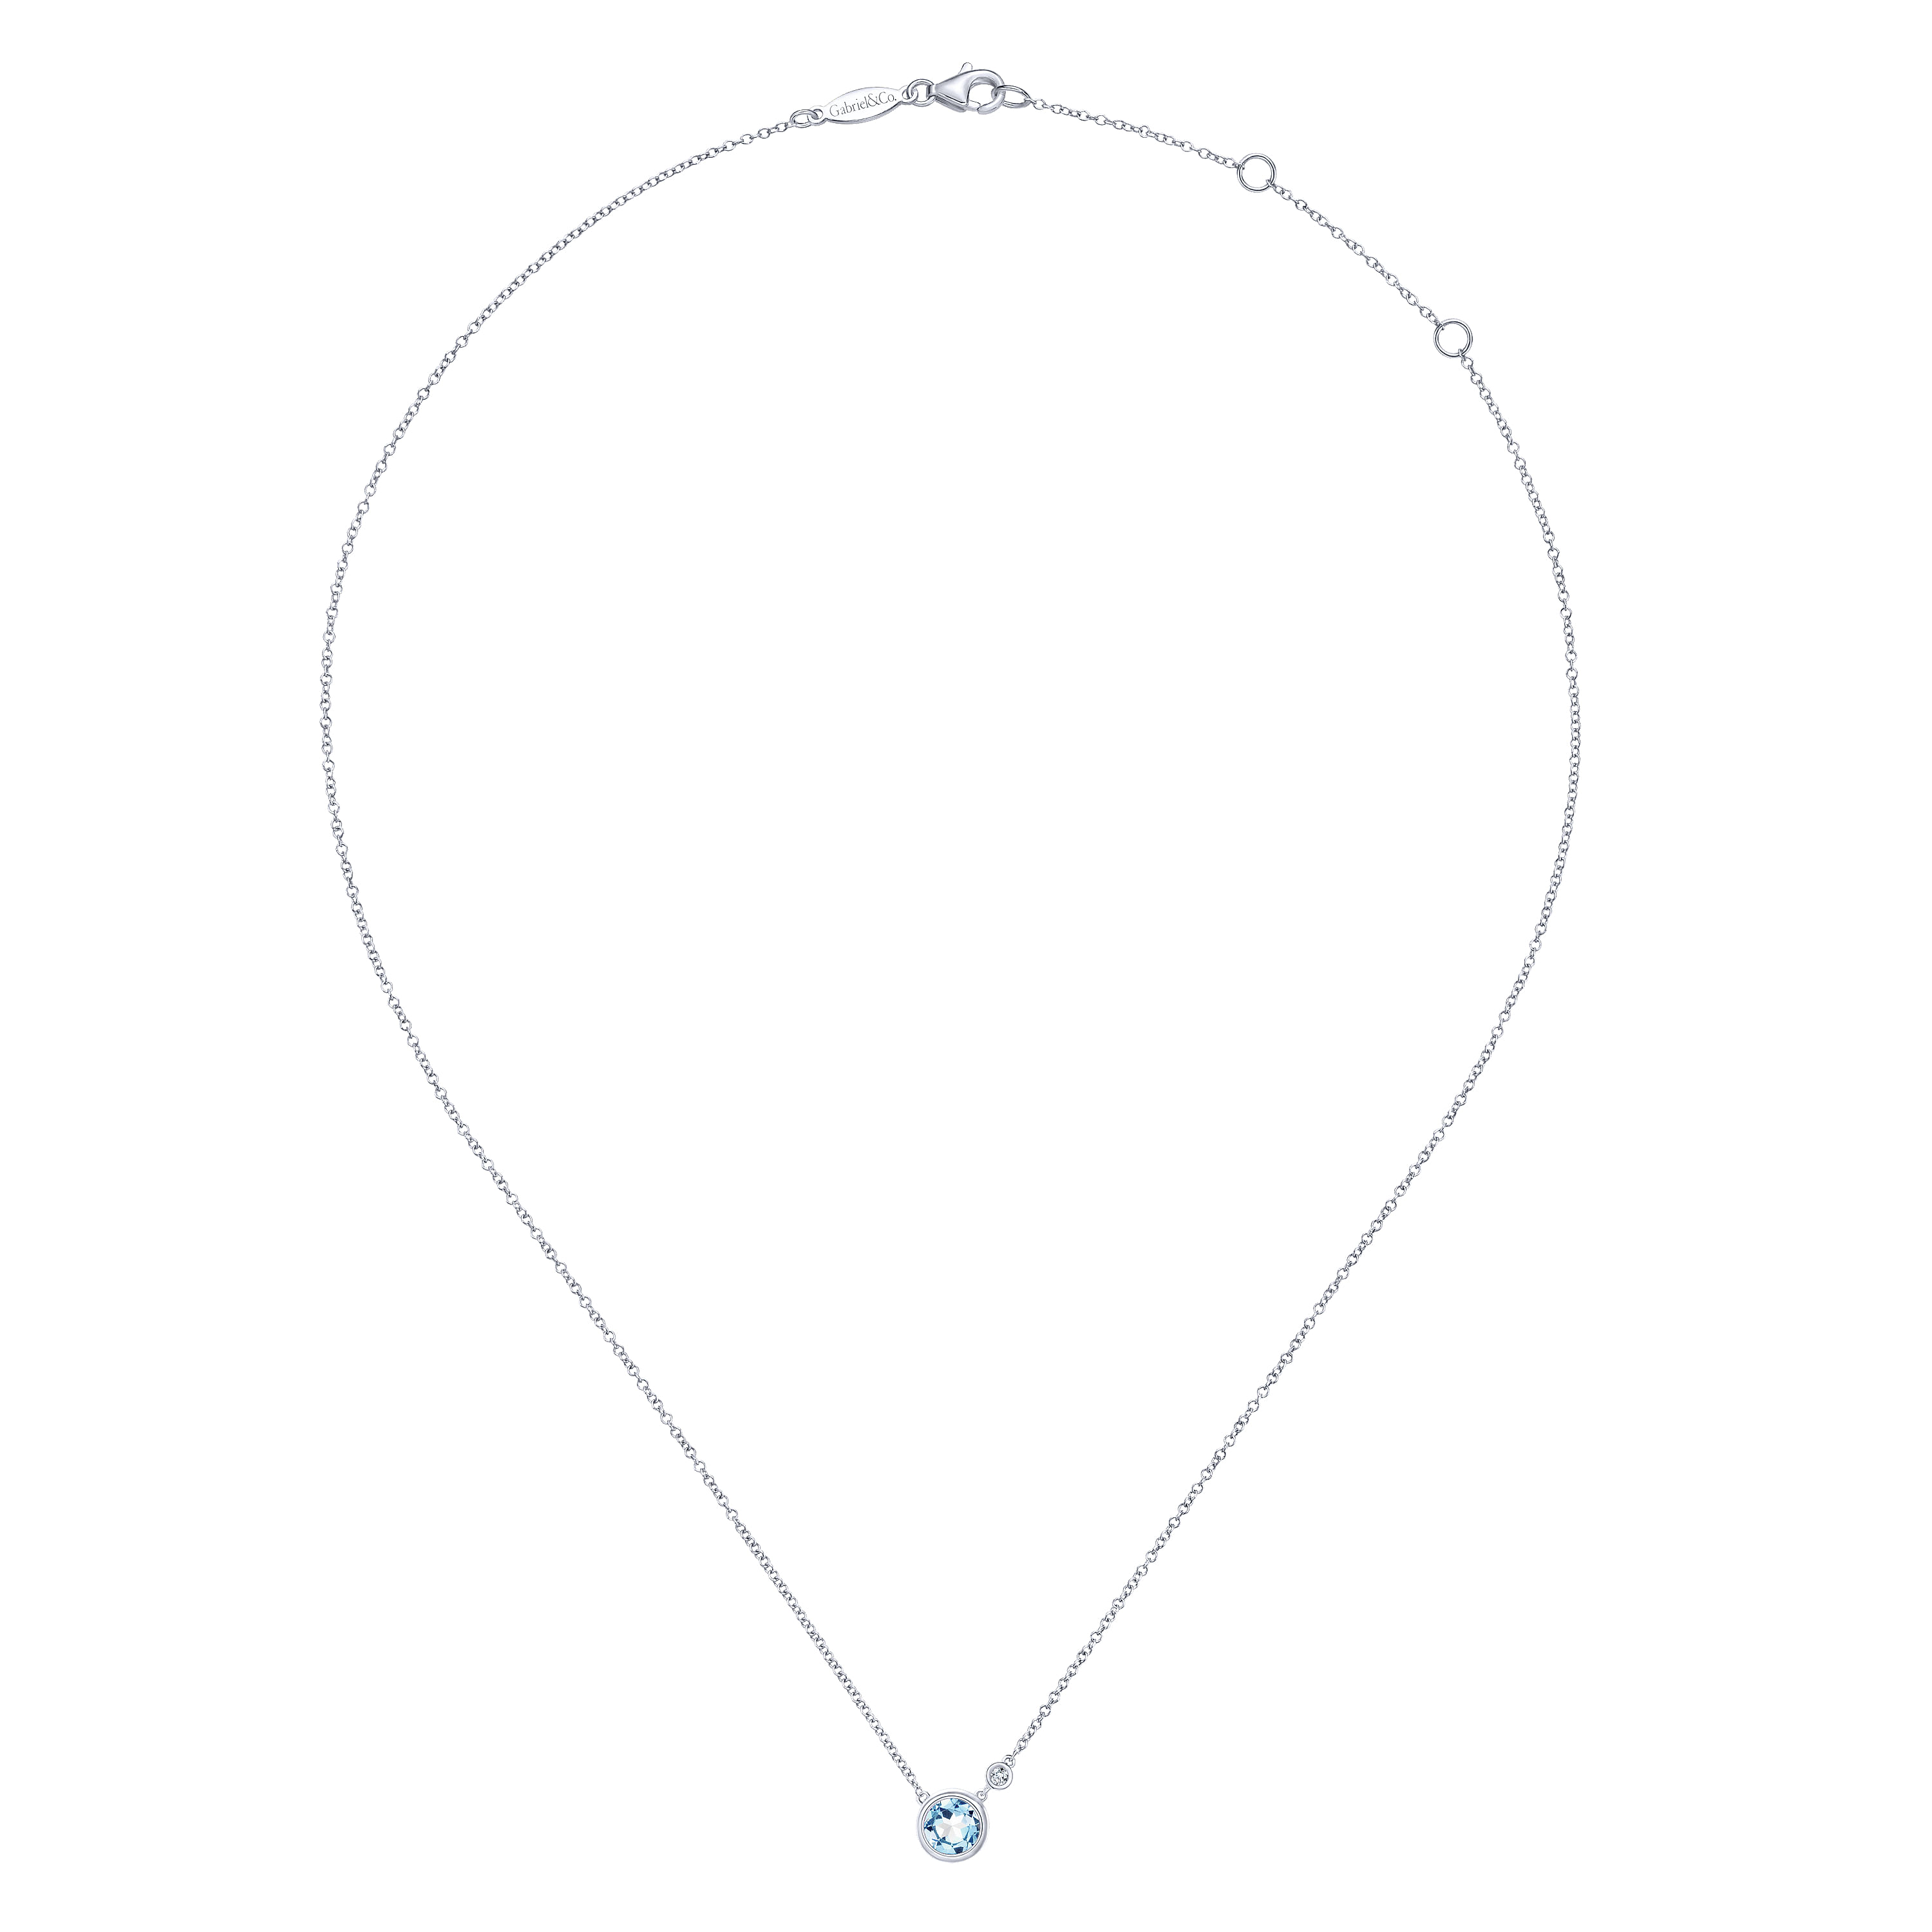 925 Sterling Silver Aquamarine and Diamond Pendant Necklace